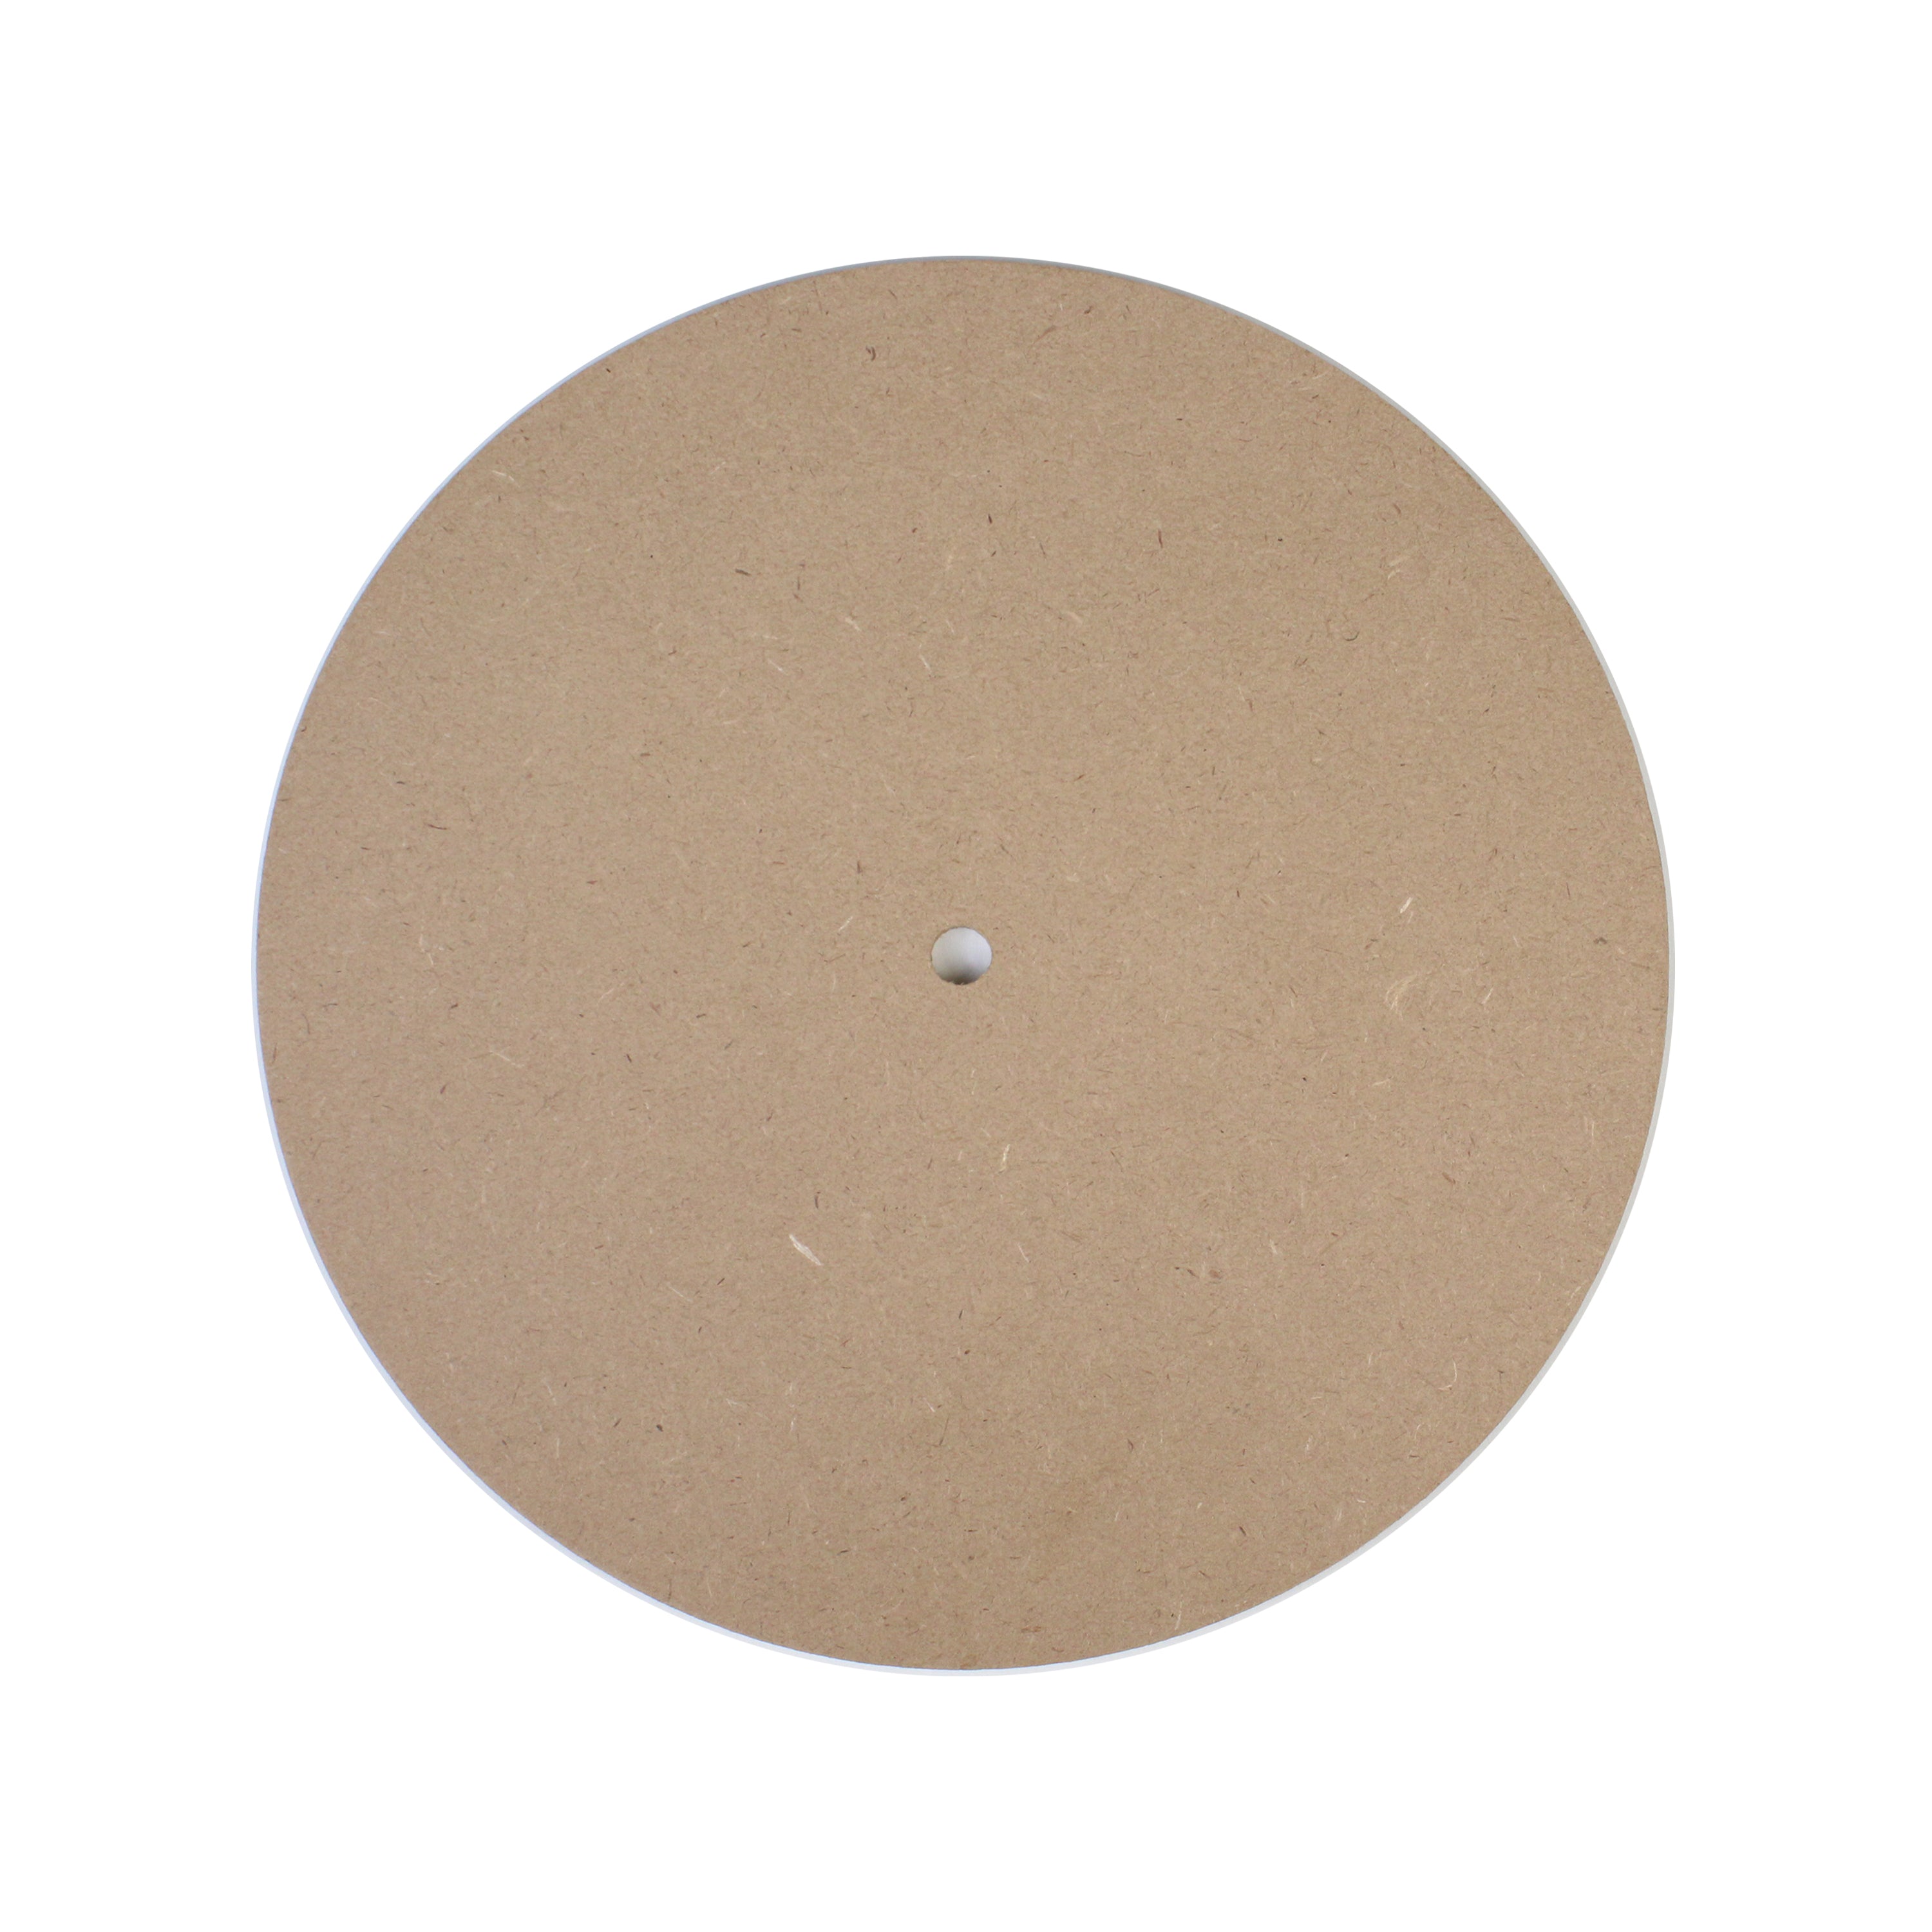 Mdf Clock Face 12Inch Dia 5.5Mm Thick 1Pc Lb